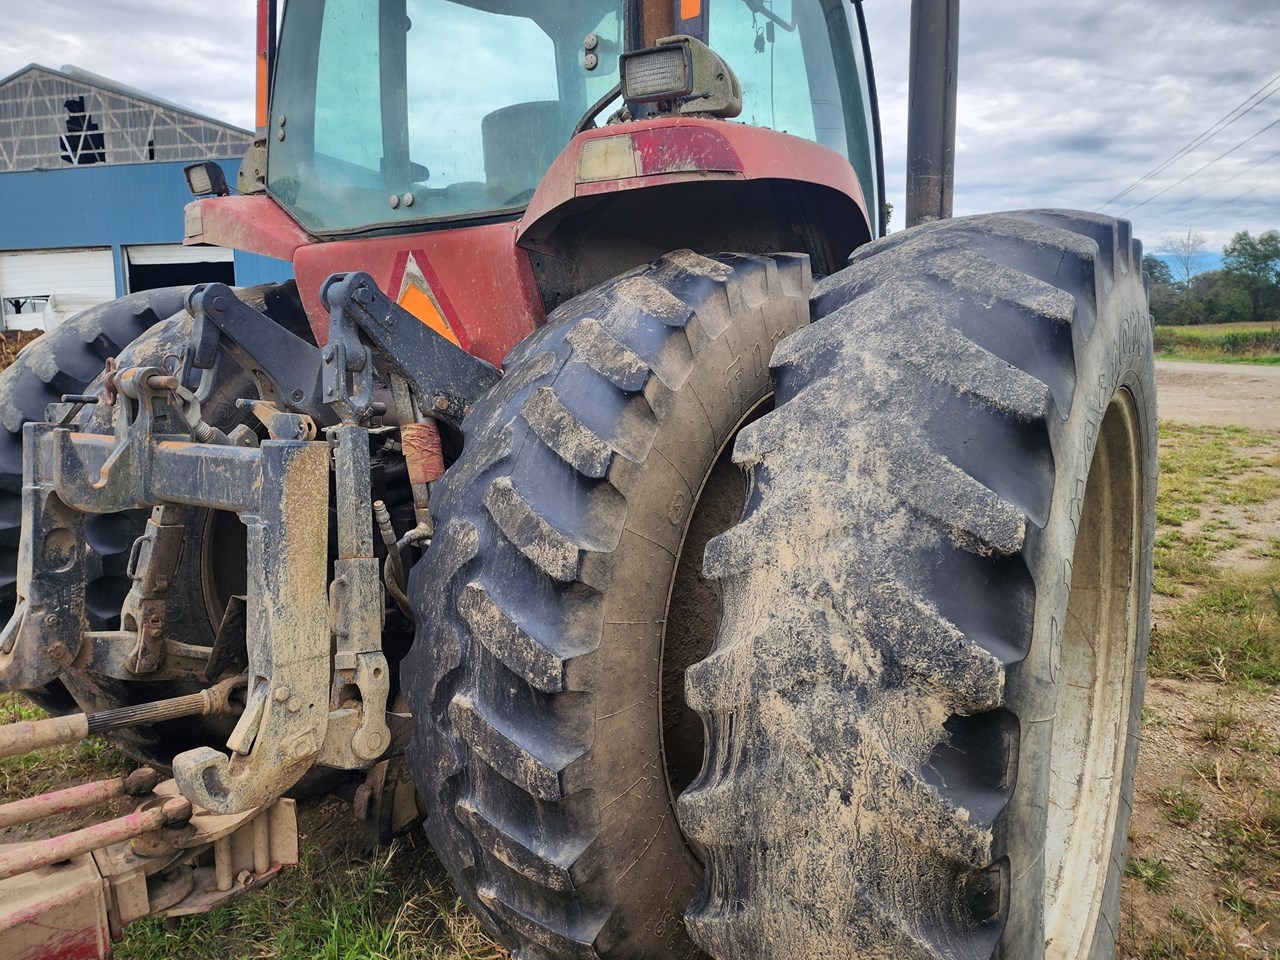 1999 Case IH MX240 Tractor - Row Crop For Sale